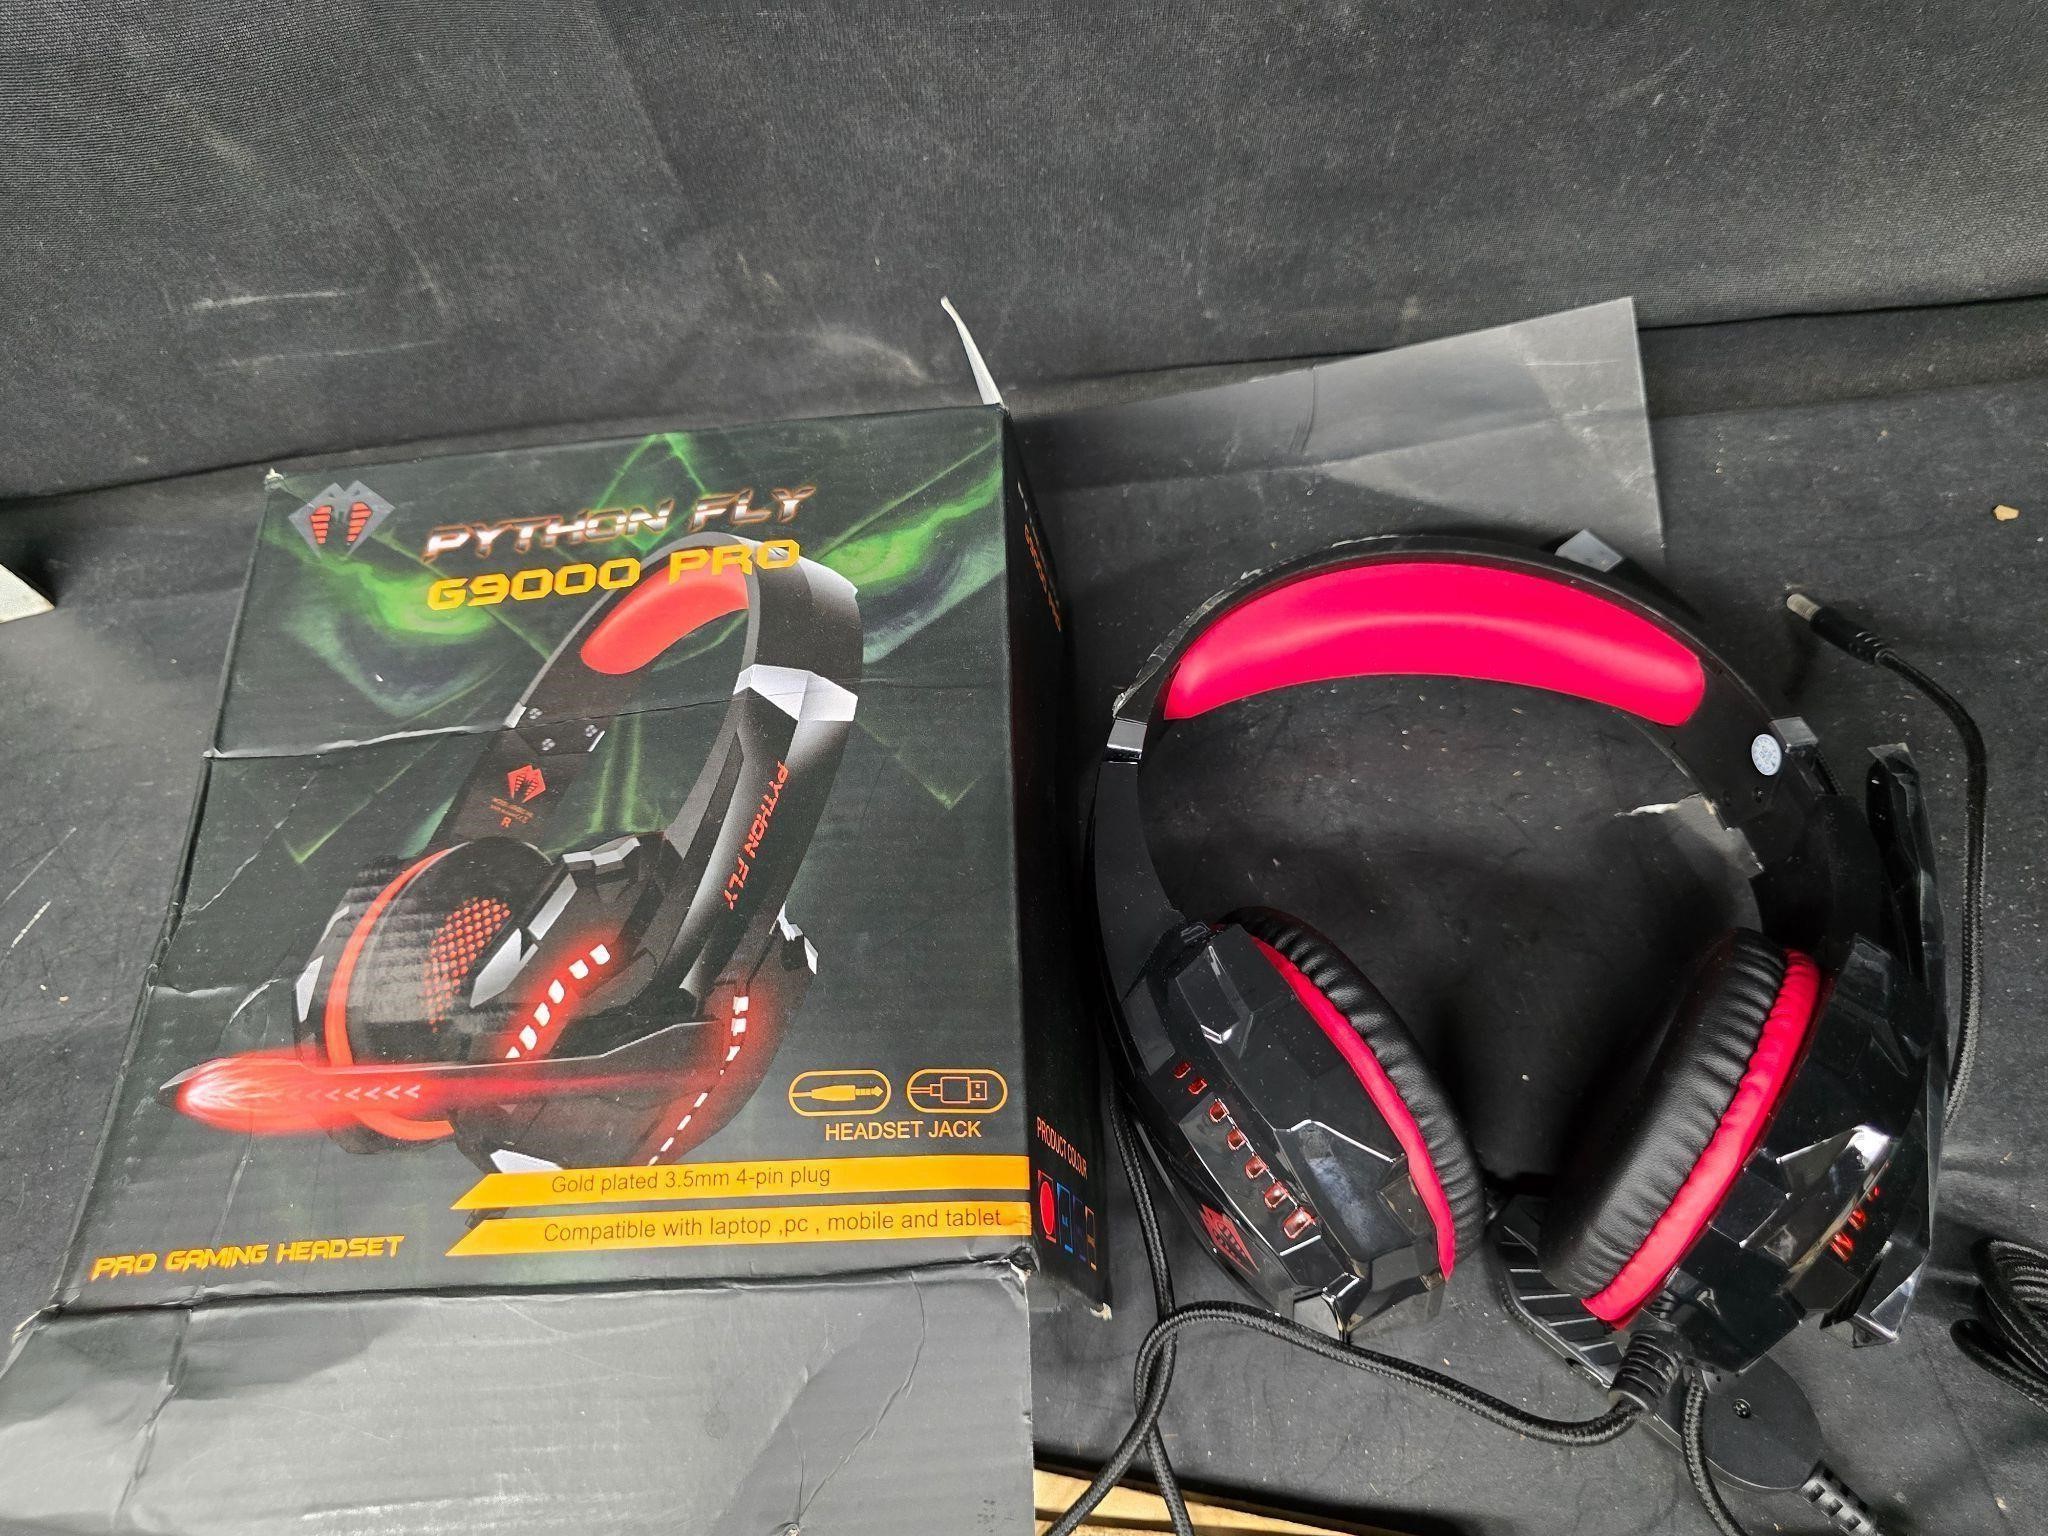 Gaming headset, drone